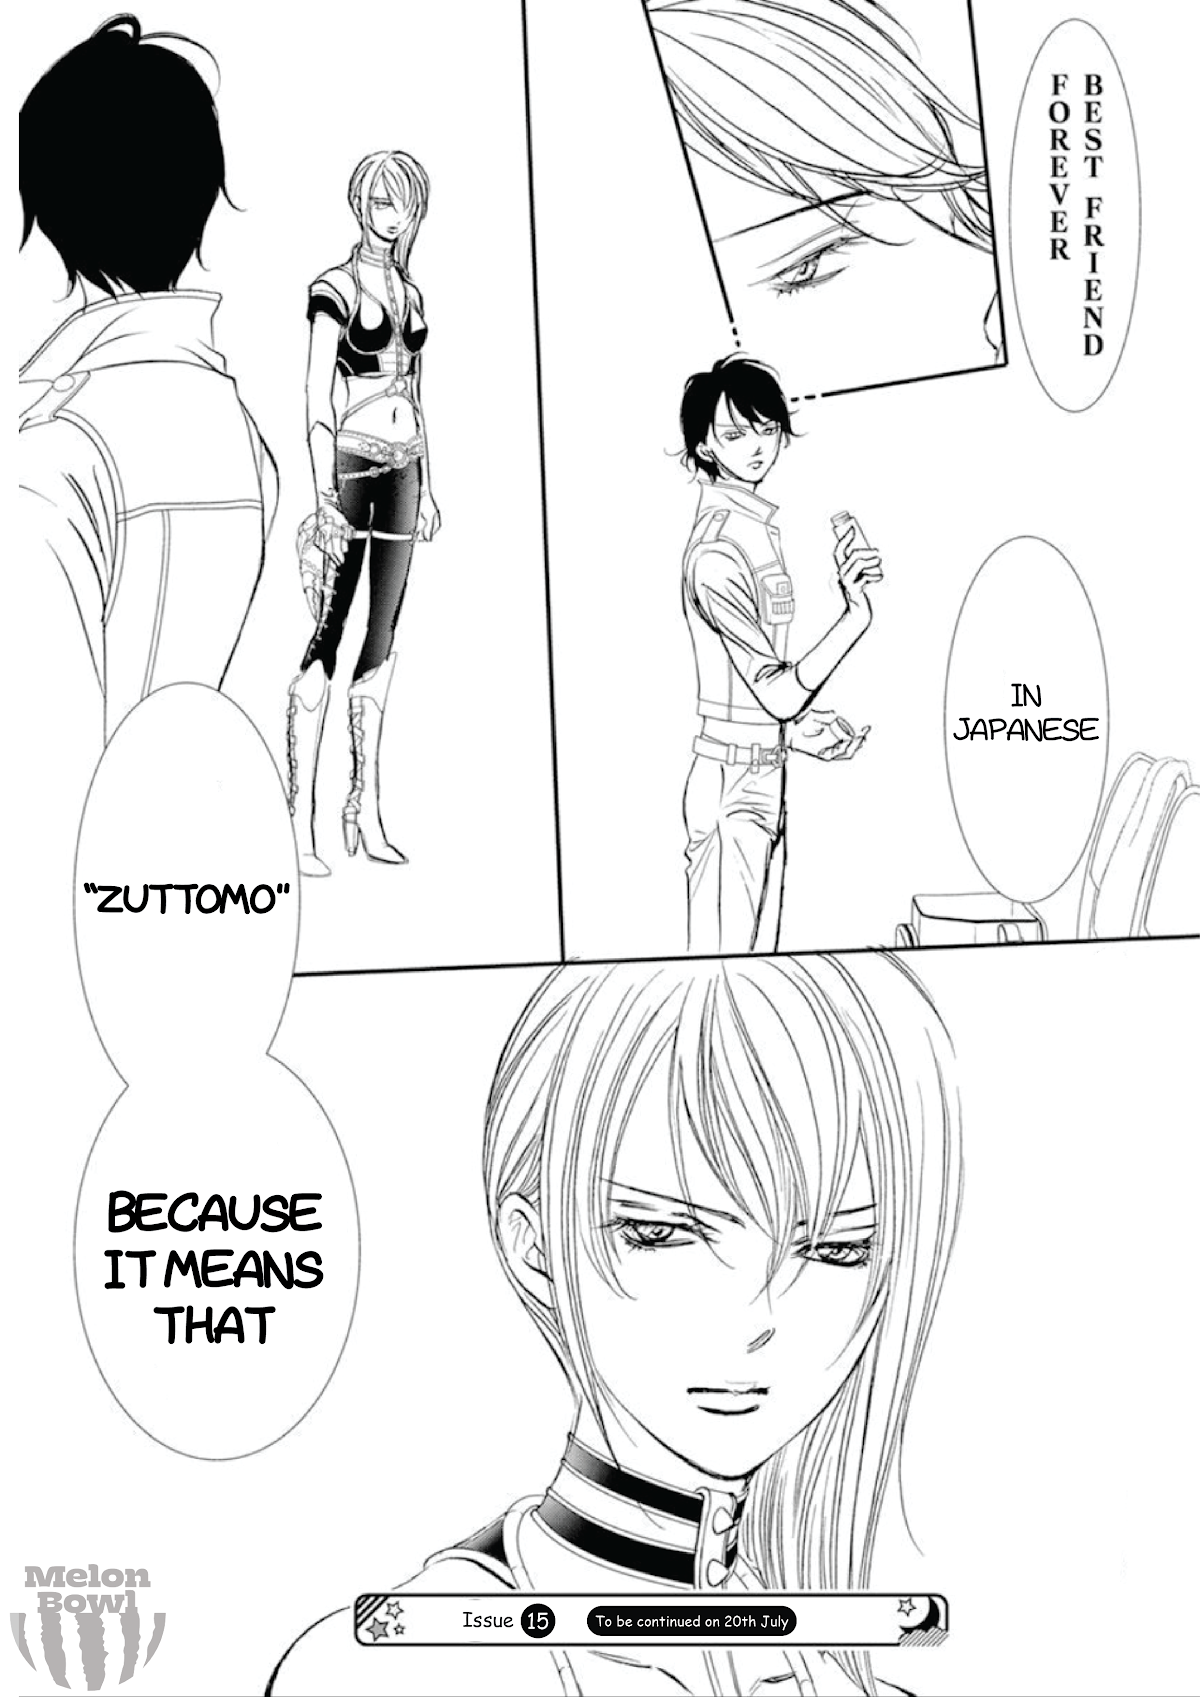 Skip Beat!, Chapter 307 Fairytale Dialogue image 19